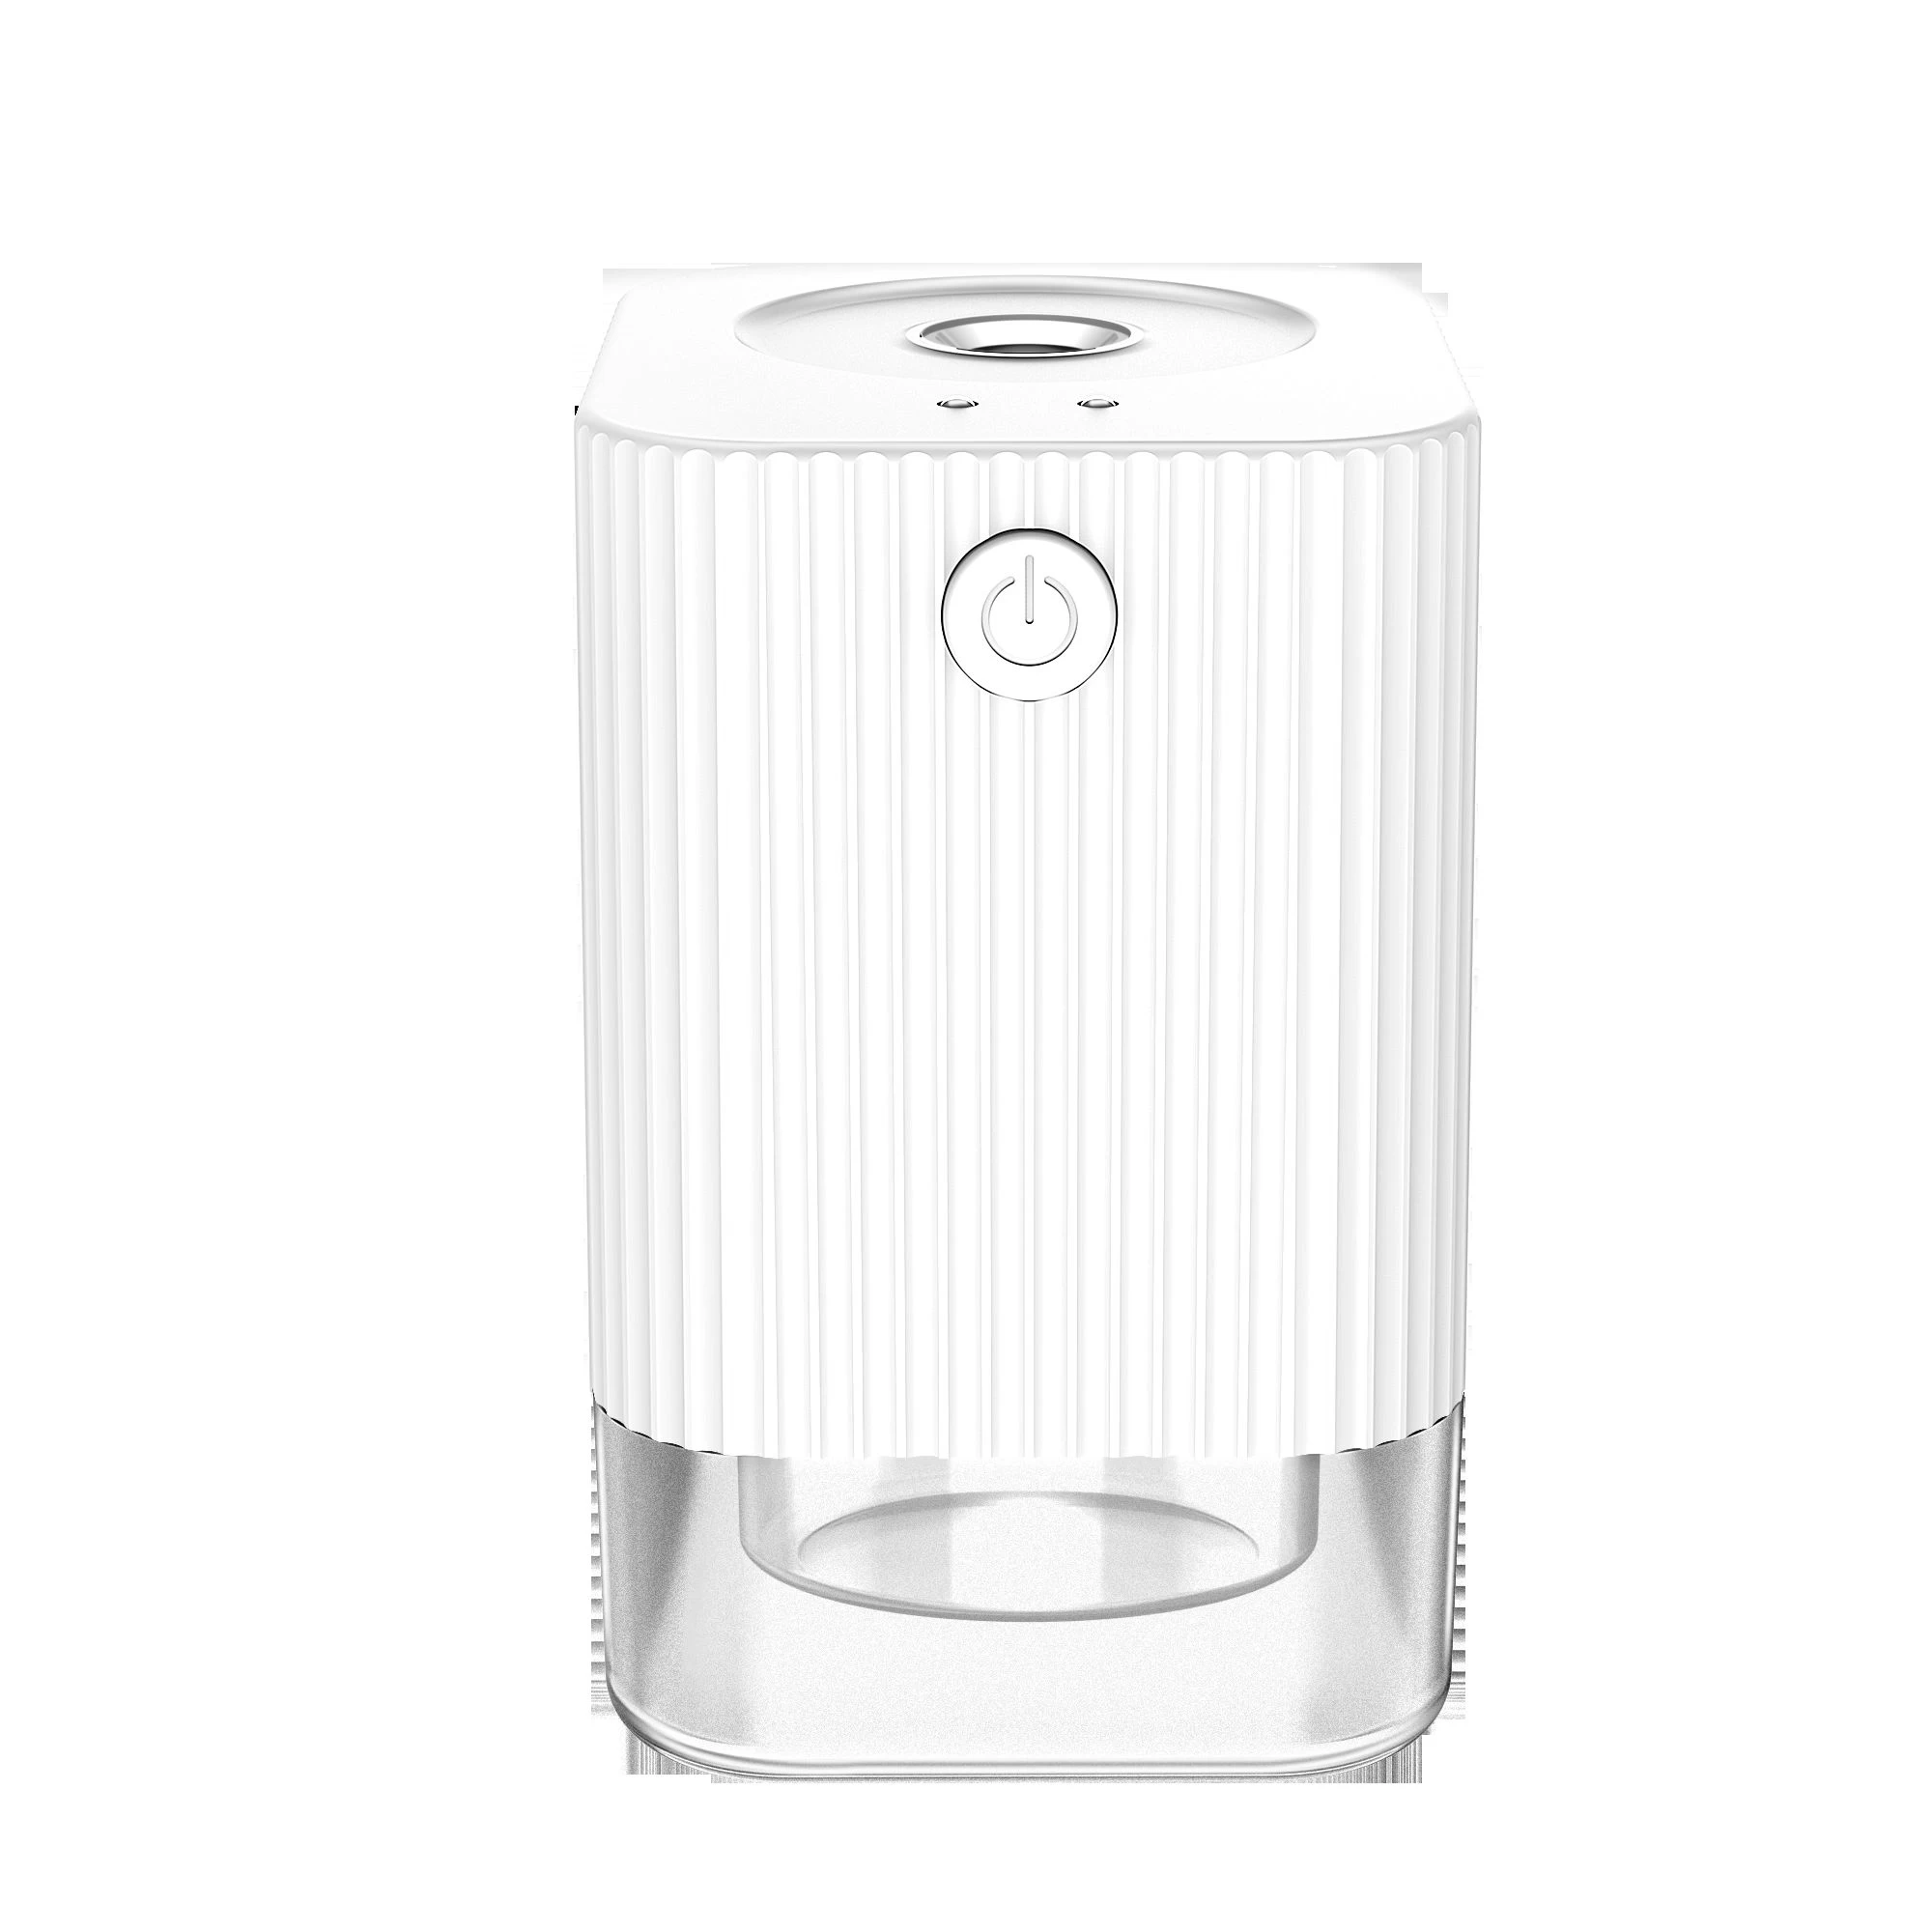 Mini touch-less Auto alcohol spray dispenser, infrared Sensor touch free hand sanitizer humidifier,smart sprayer